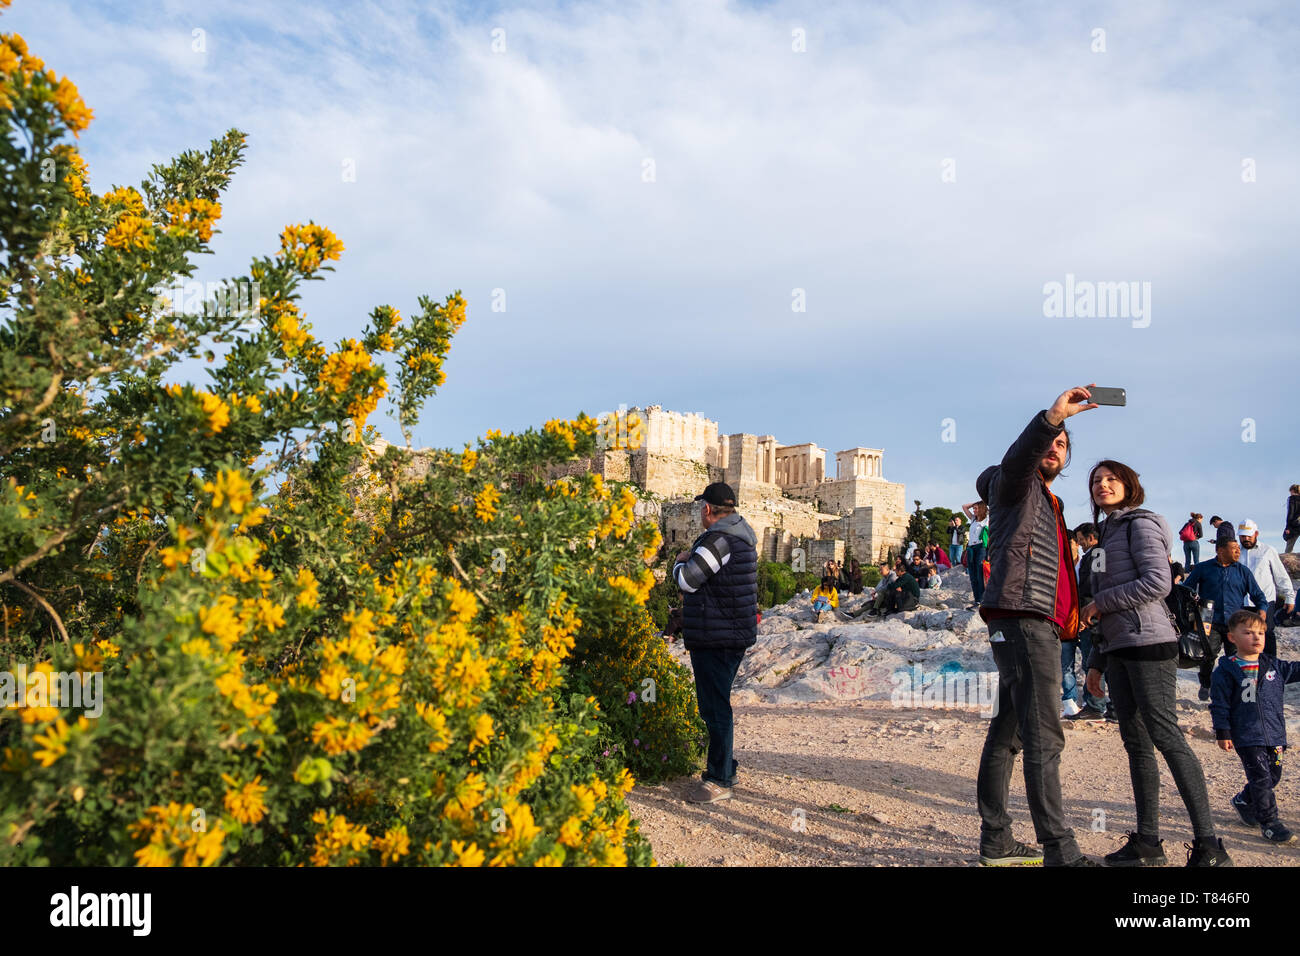 Athens, Greece - March 9, 2019: Tourists take selfies on Areopagus Hill against the Acropolis of Athens in the background Stock Photo